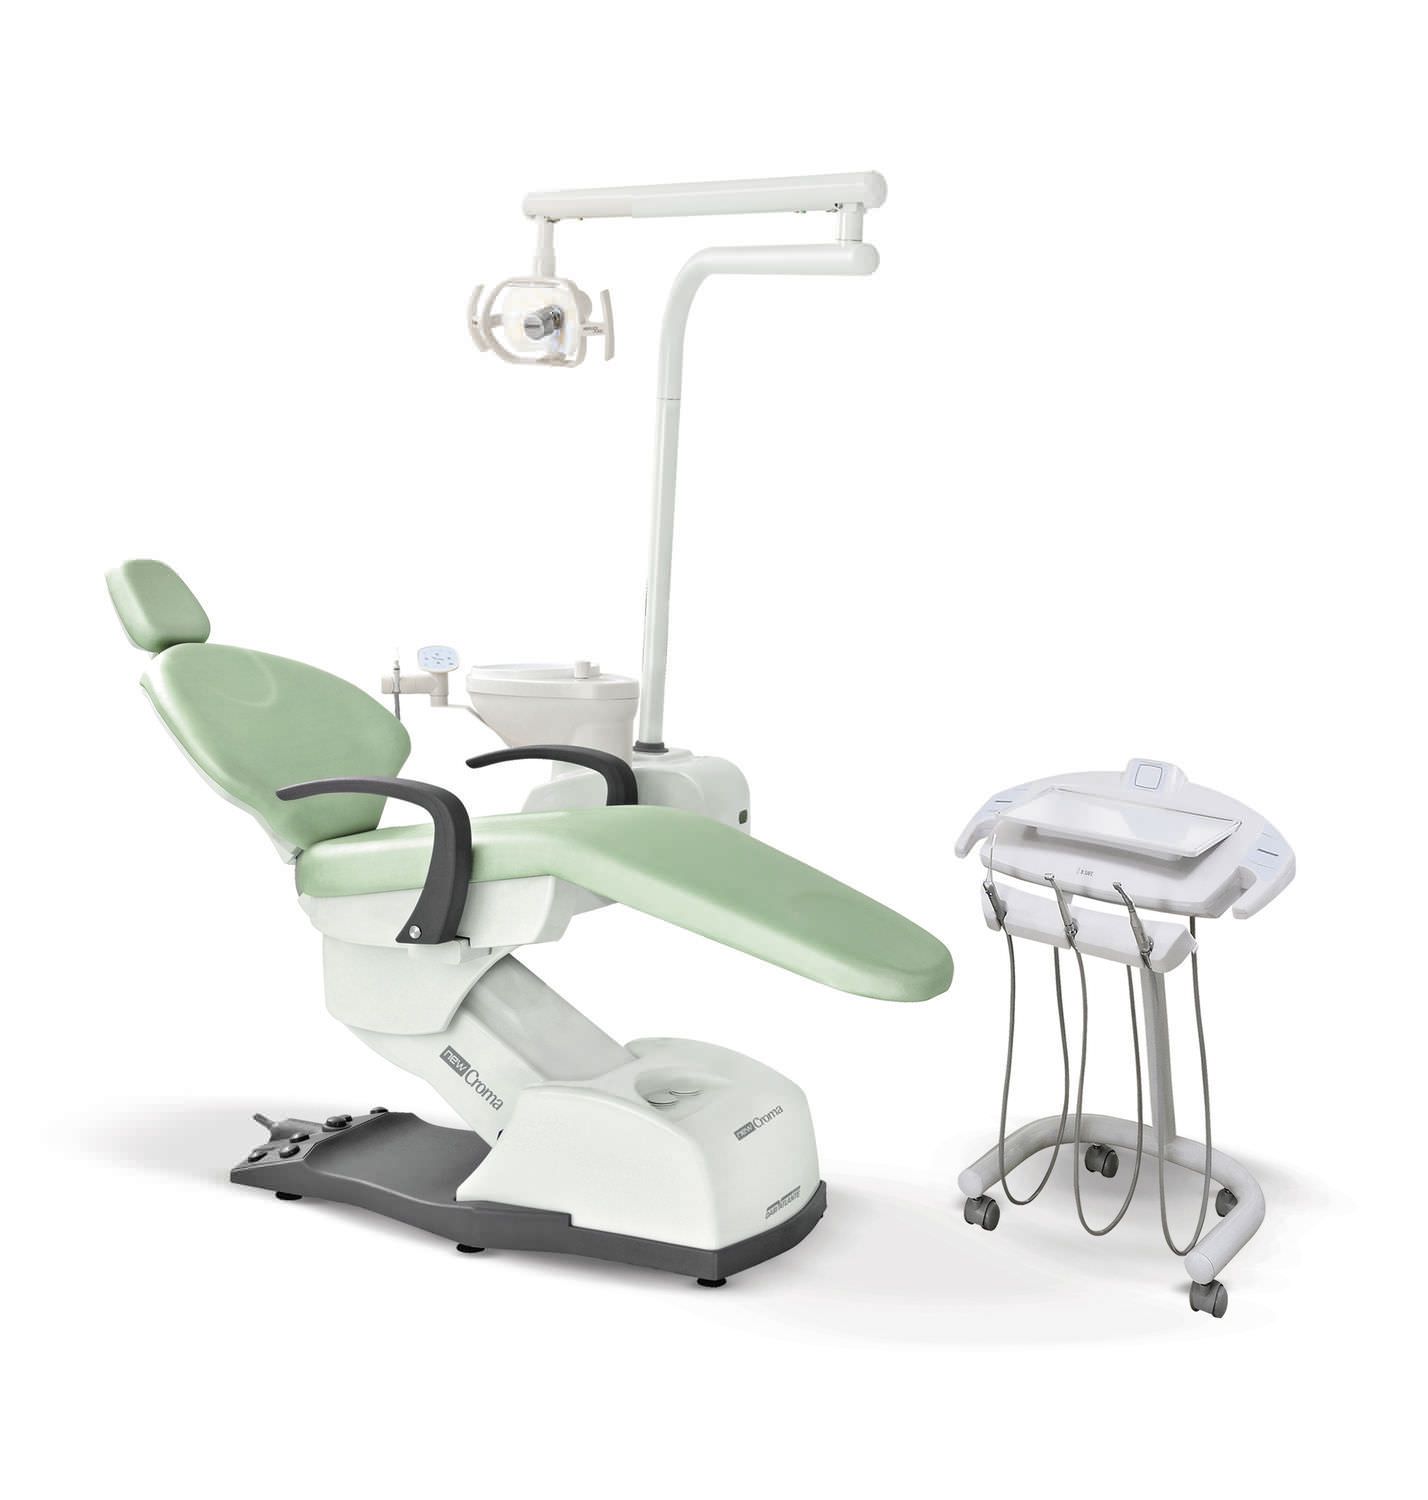 Dental treatment unit with lamp / with delivery system CROMA TECHNO CART 2191 DABI ATLANTE